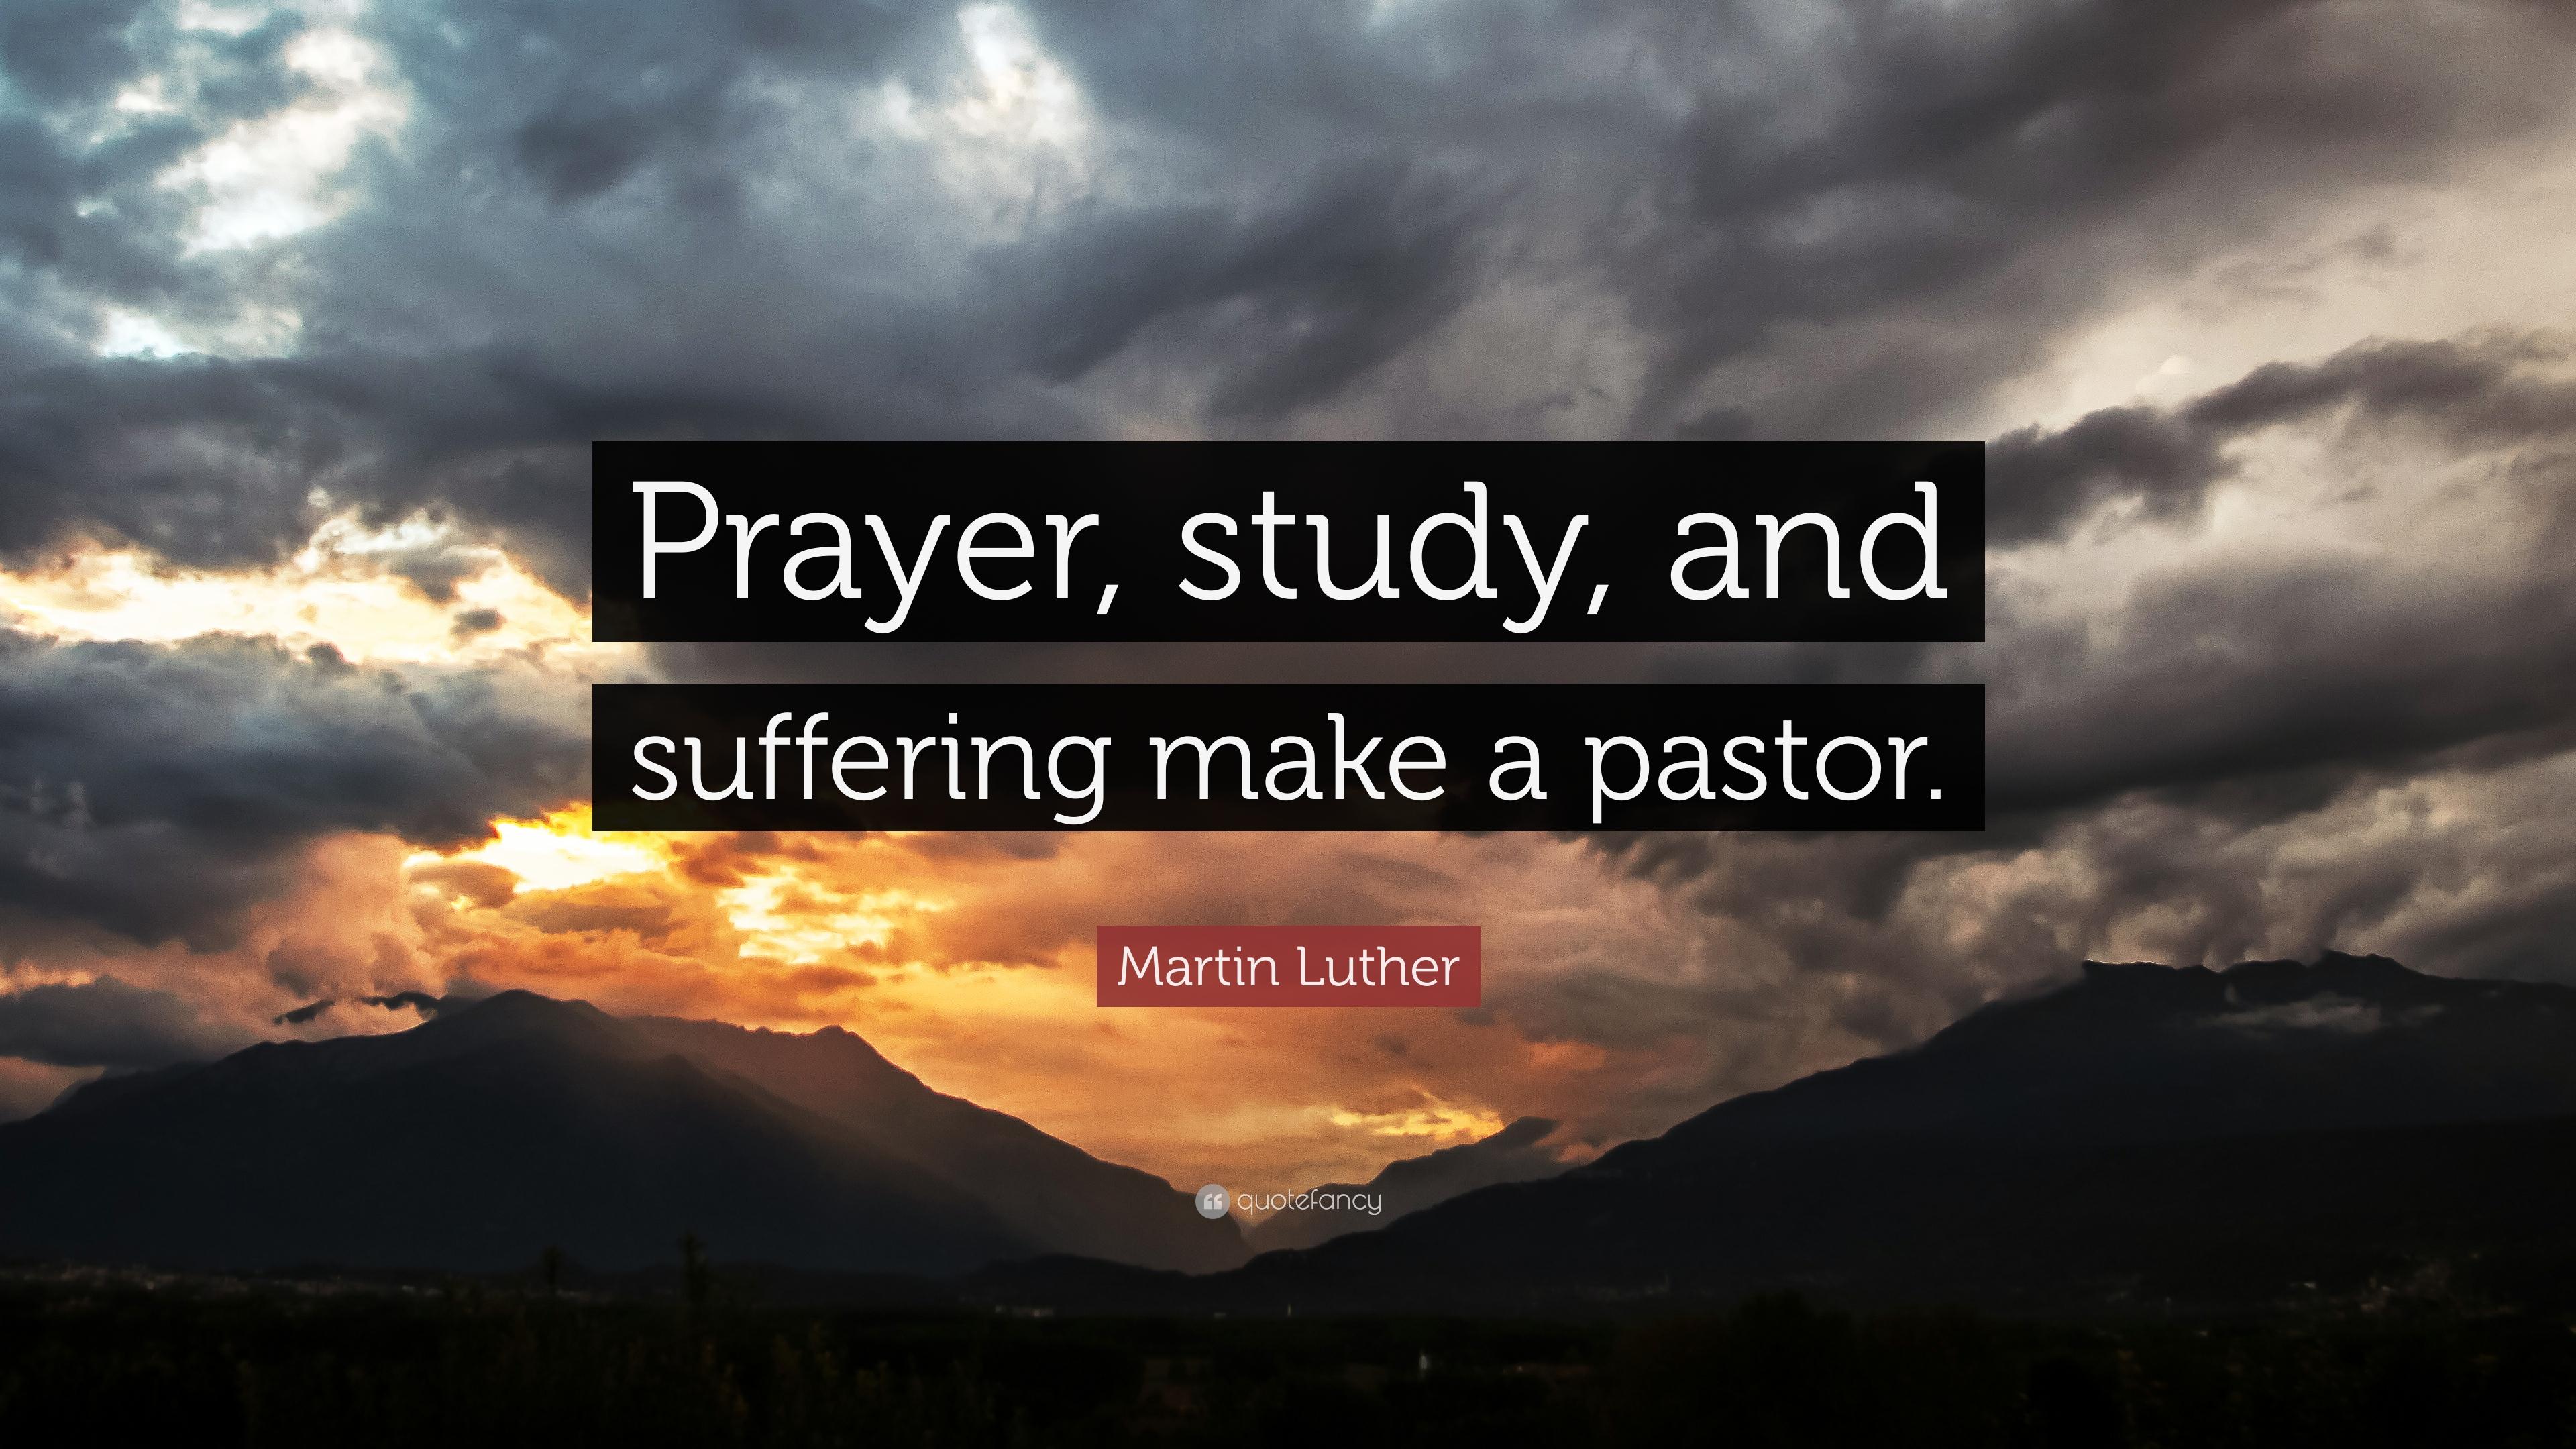 Martin Luther Quote: “Prayer, study, and suffering make a pastor